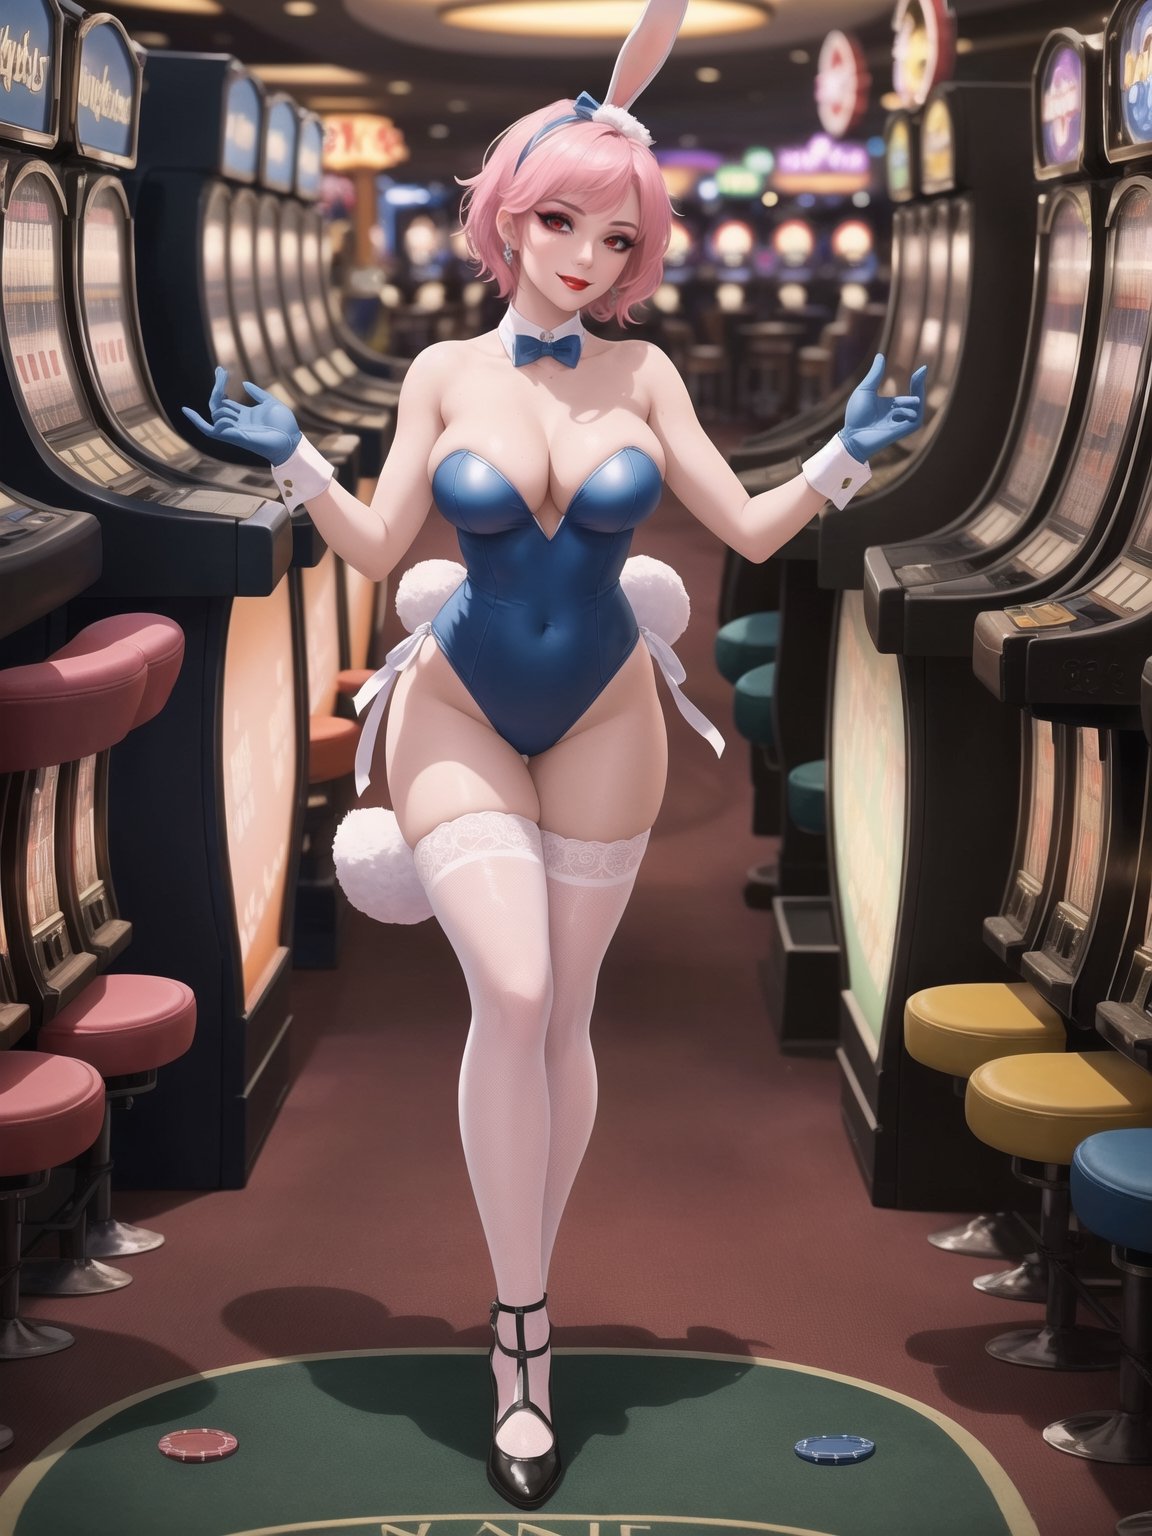 A bunny woman is wearing a white bunny costume with sashes and ribbons in blue. The costume is quite tight on the body, and she is wearing white lycra stockings and black shoes. She is also wearing bunny ears and Bunny paw gloves. She has large breasts, short pink hair, Mohawk, very short hair and shiny hair. She is looking directly at the viewer. She is in a casino in Las Vegas with lots of slot machines, lots of poker and card tables, lots of gambling tables. The casino is crowded with people with different ethnicities. ((She is striking a sensual pose, leaning on anything or object, resting and leaning against herself over it)). ((full body)), ultra futuristic, UHD, best possible quality, ultra detailed, best possible resolution, Unreal Engine 5, professional photography, perfect hand, fingers, hand, perfect, More detail,